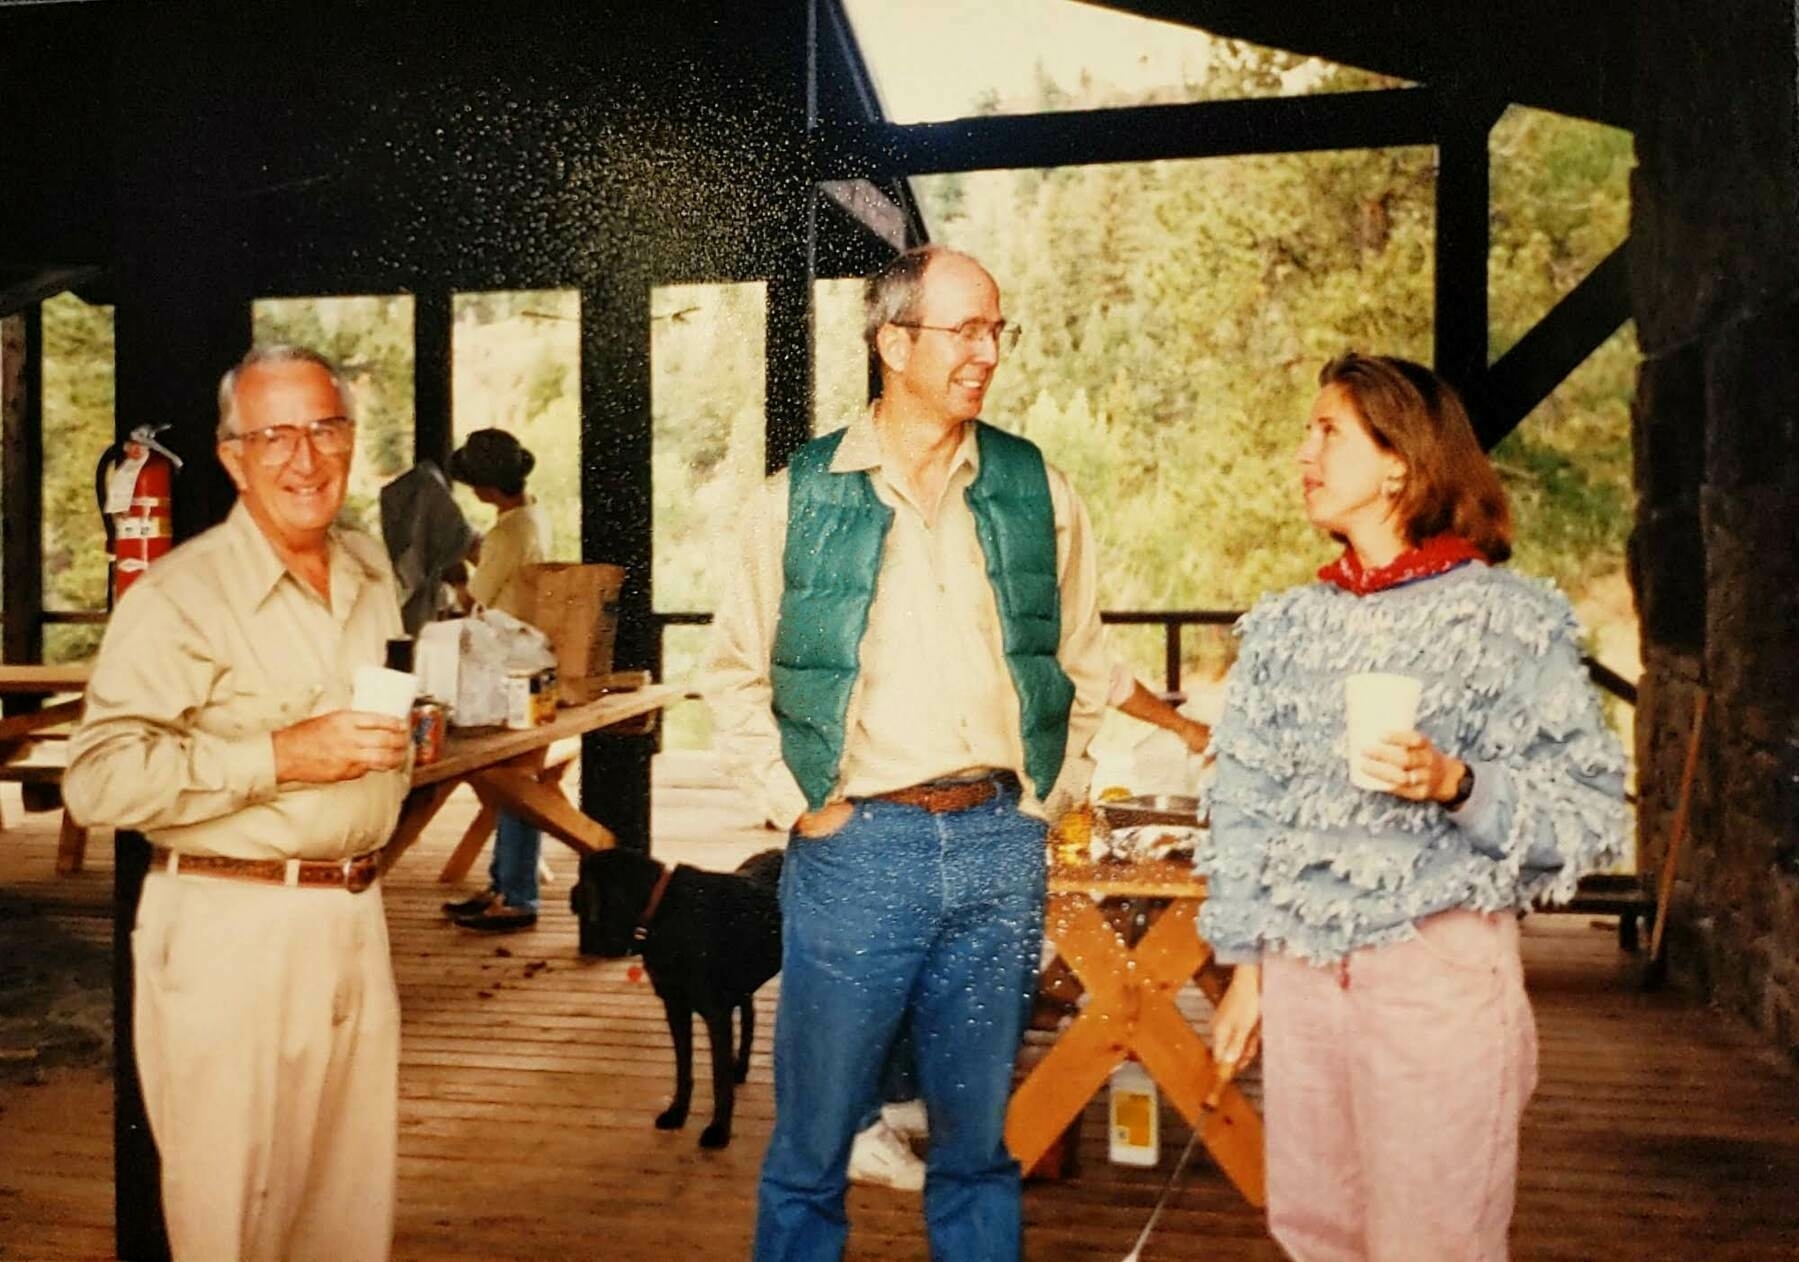 An older man, a middle-aged man, and a younger woman at a picnic.